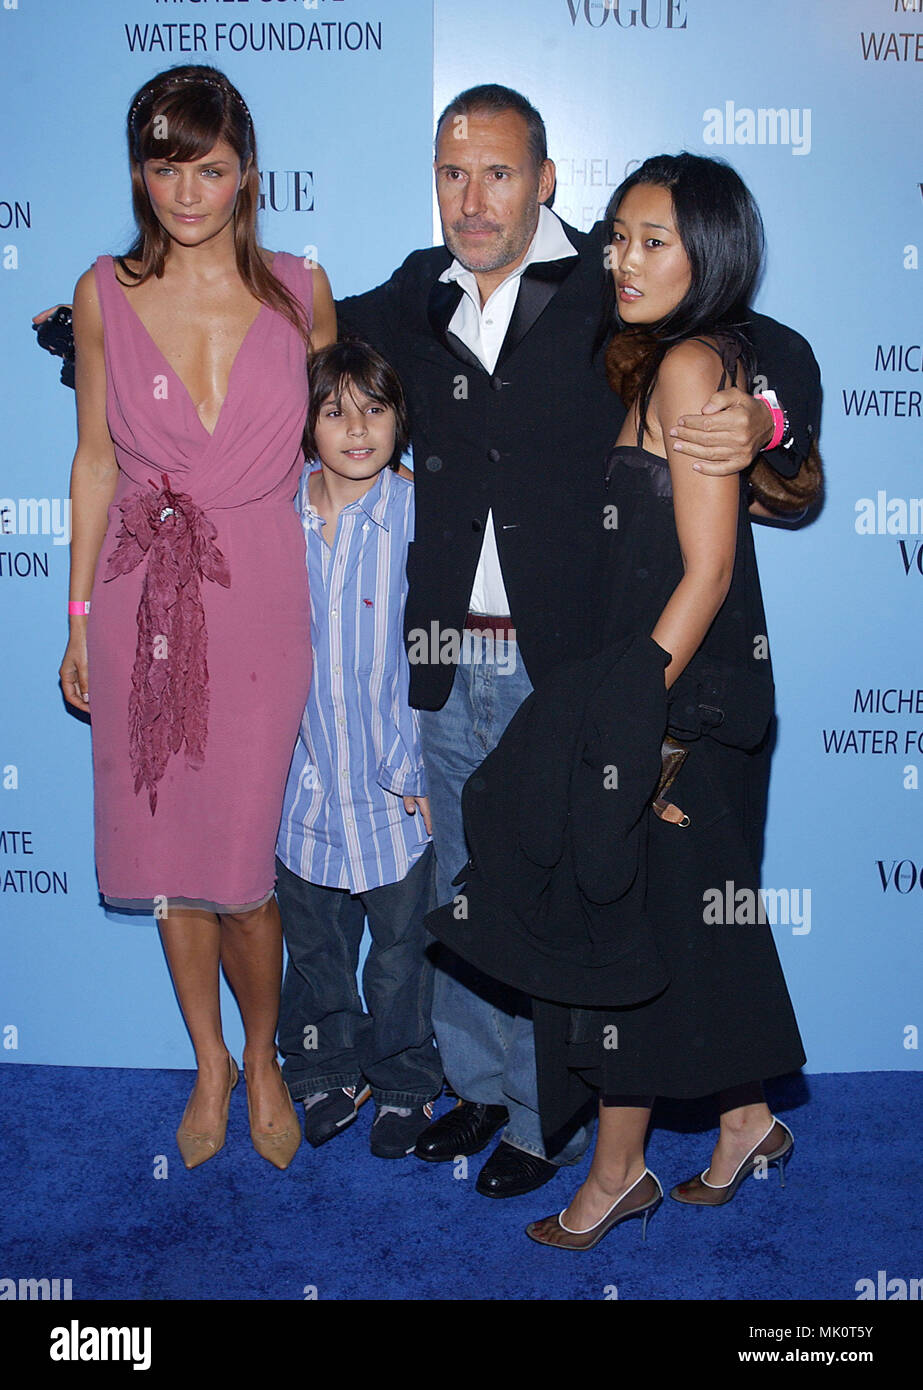 Michel Comte  with wife, son and Helena Christensen arriving at the Celebrity, fashion Photography and Philanthropy, Michl Comte Gala for the Water foundation at ACE Gallety in Beverly Hills, Los Angeles. February 25, 2004.          -            ComteMichel_Christensen013.JPG           -              ComteMichel_Christensen013.JPGComteMichel_Christensen013  Event in Hollywood Life - California,  Red Carpet Event, Vertical, USA, Film Industry, Celebrities,  Photography, Bestof, Arts Culture and Entertainment, Topix Celebrities fashion /  from the Red Carpet-, Vertical, Best of, Hollywood Life,  Stock Photo